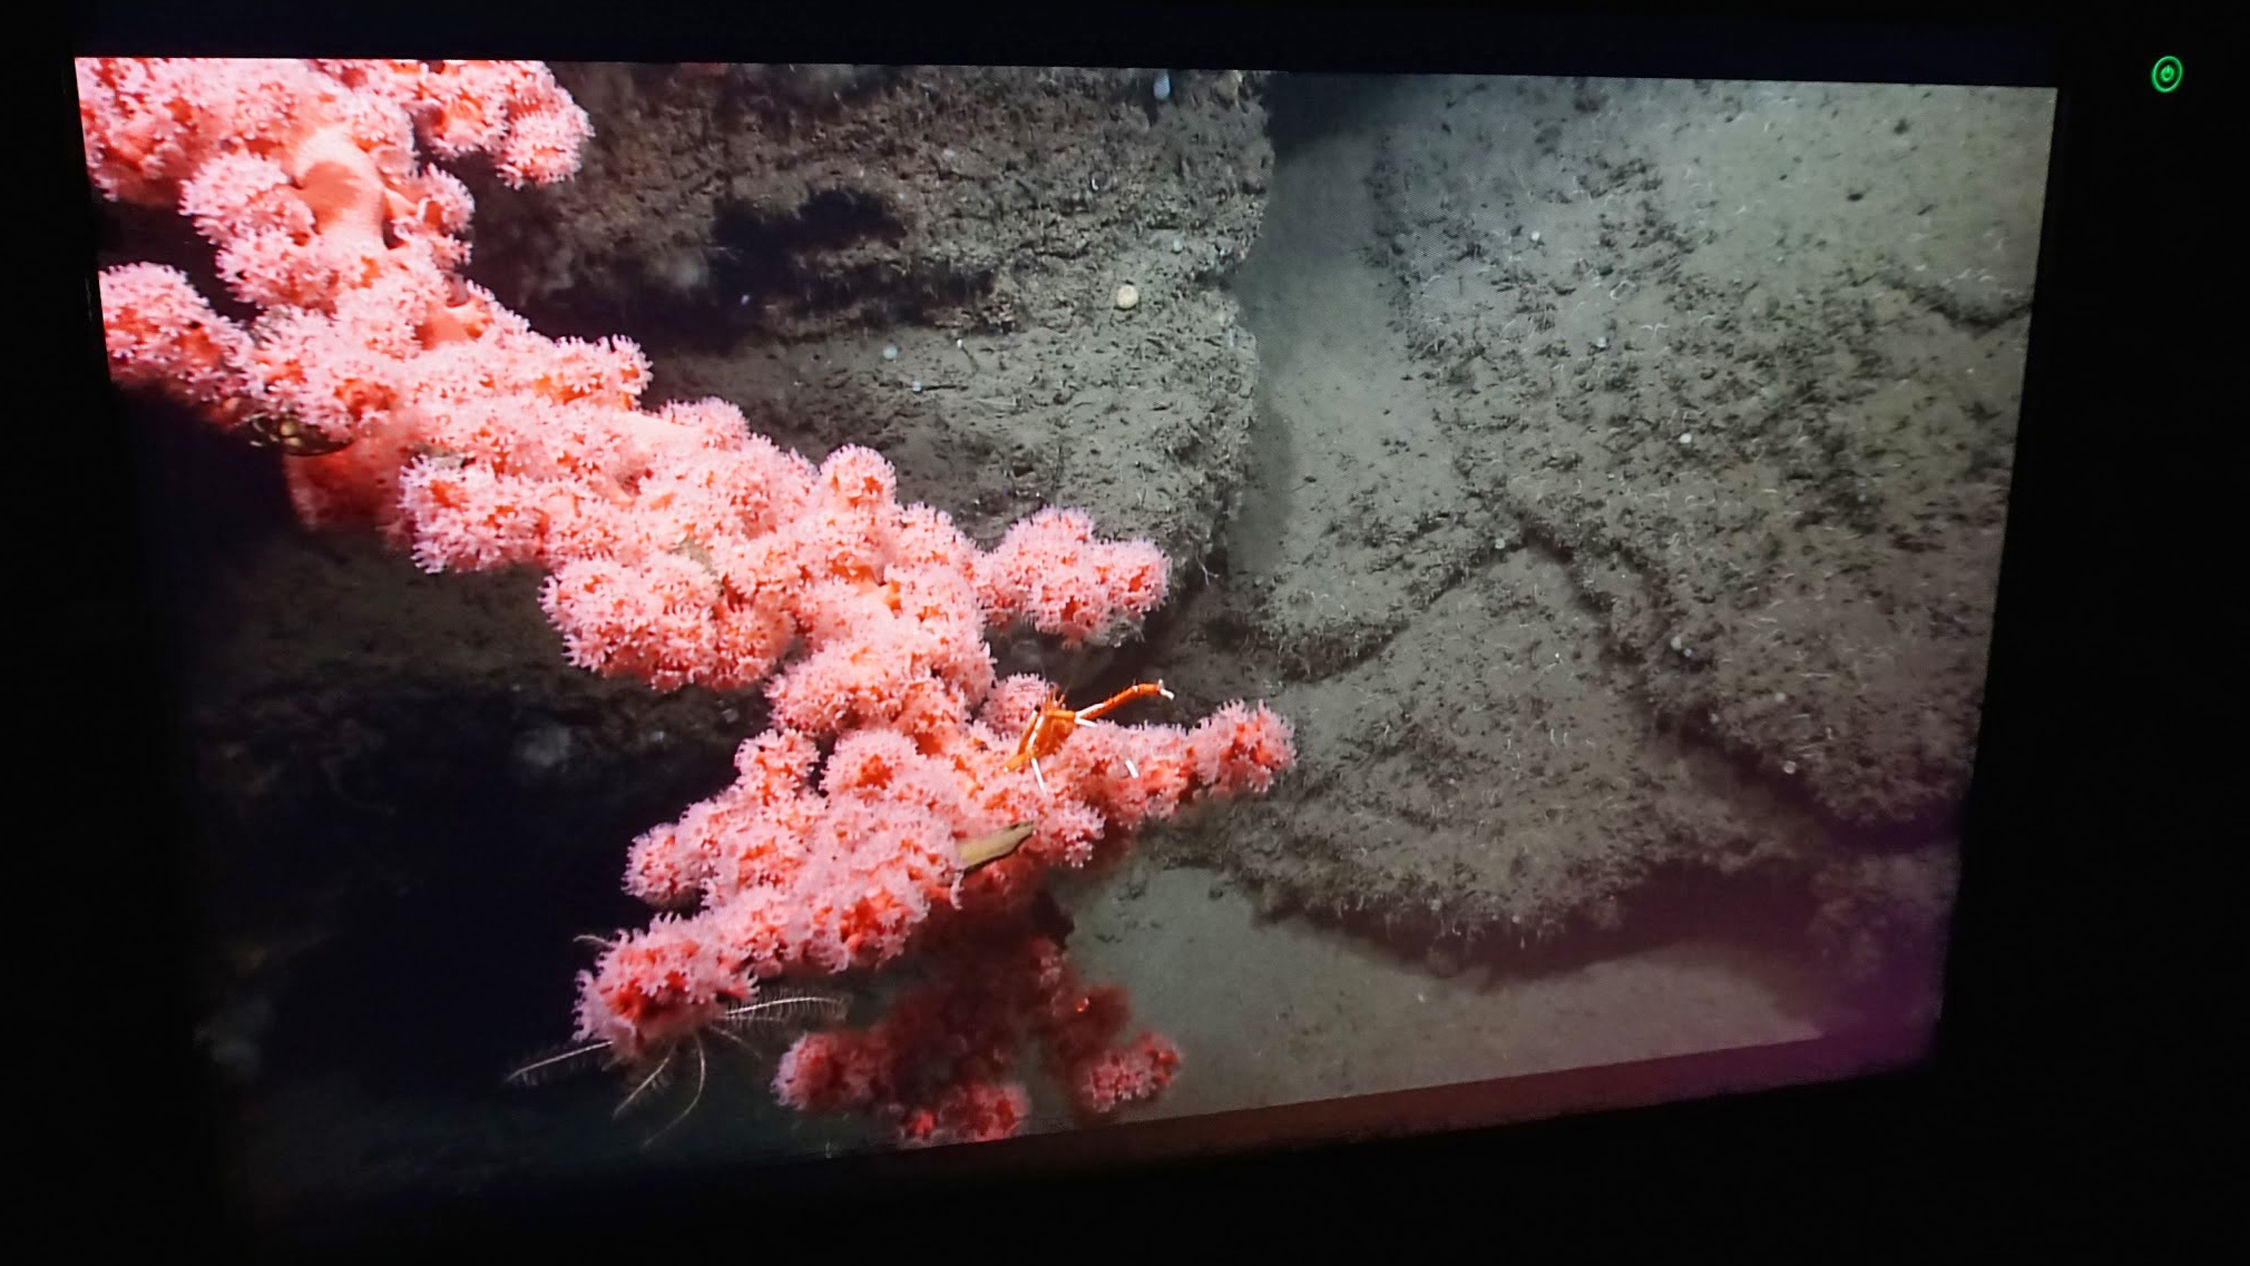 A bright pink Paragorgia ("bubble gum") coral provides a resting place for a white crinoid (lower left), a squat lobster, and a shark egg case (brown sac in bottom center). 